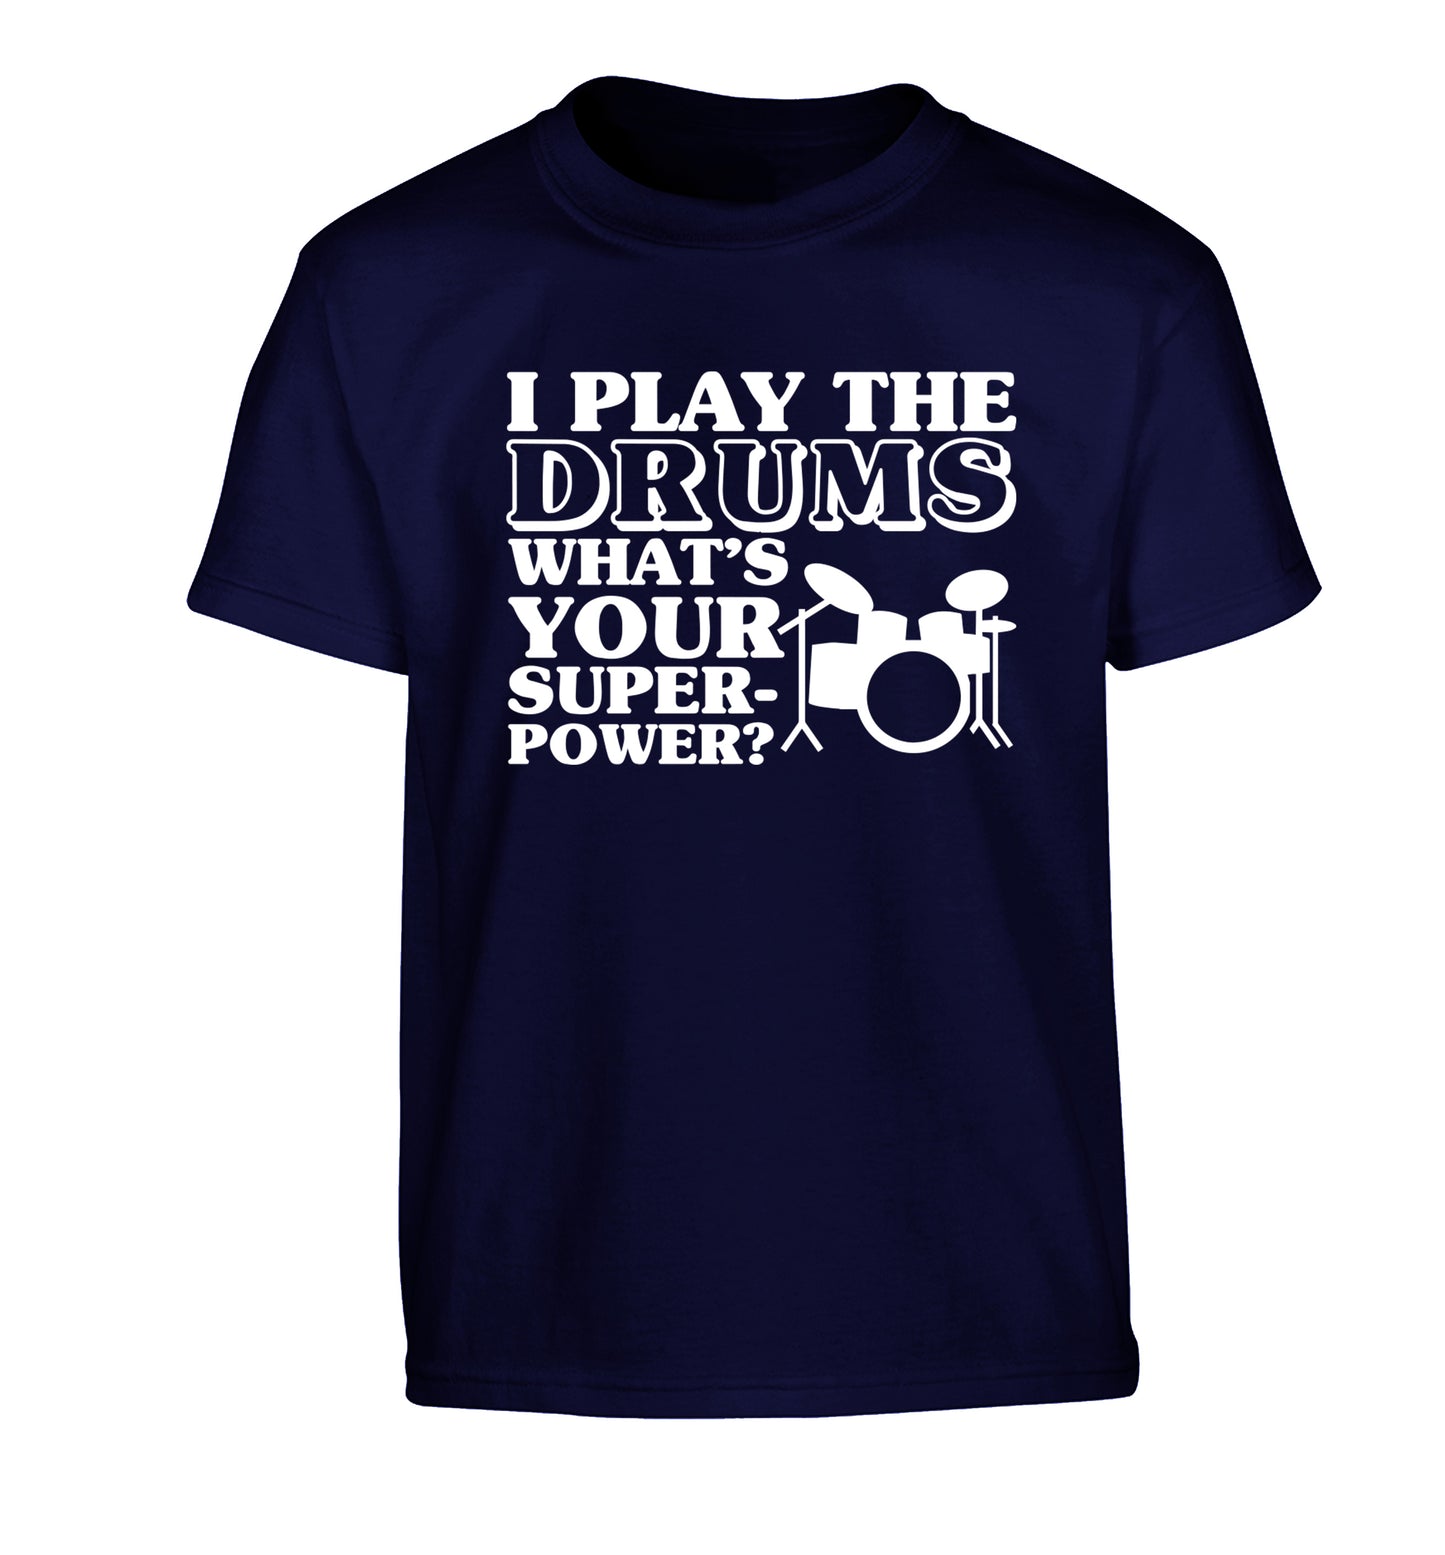 I play the drums what's your superpower? Children's navy Tshirt 12-14 Years